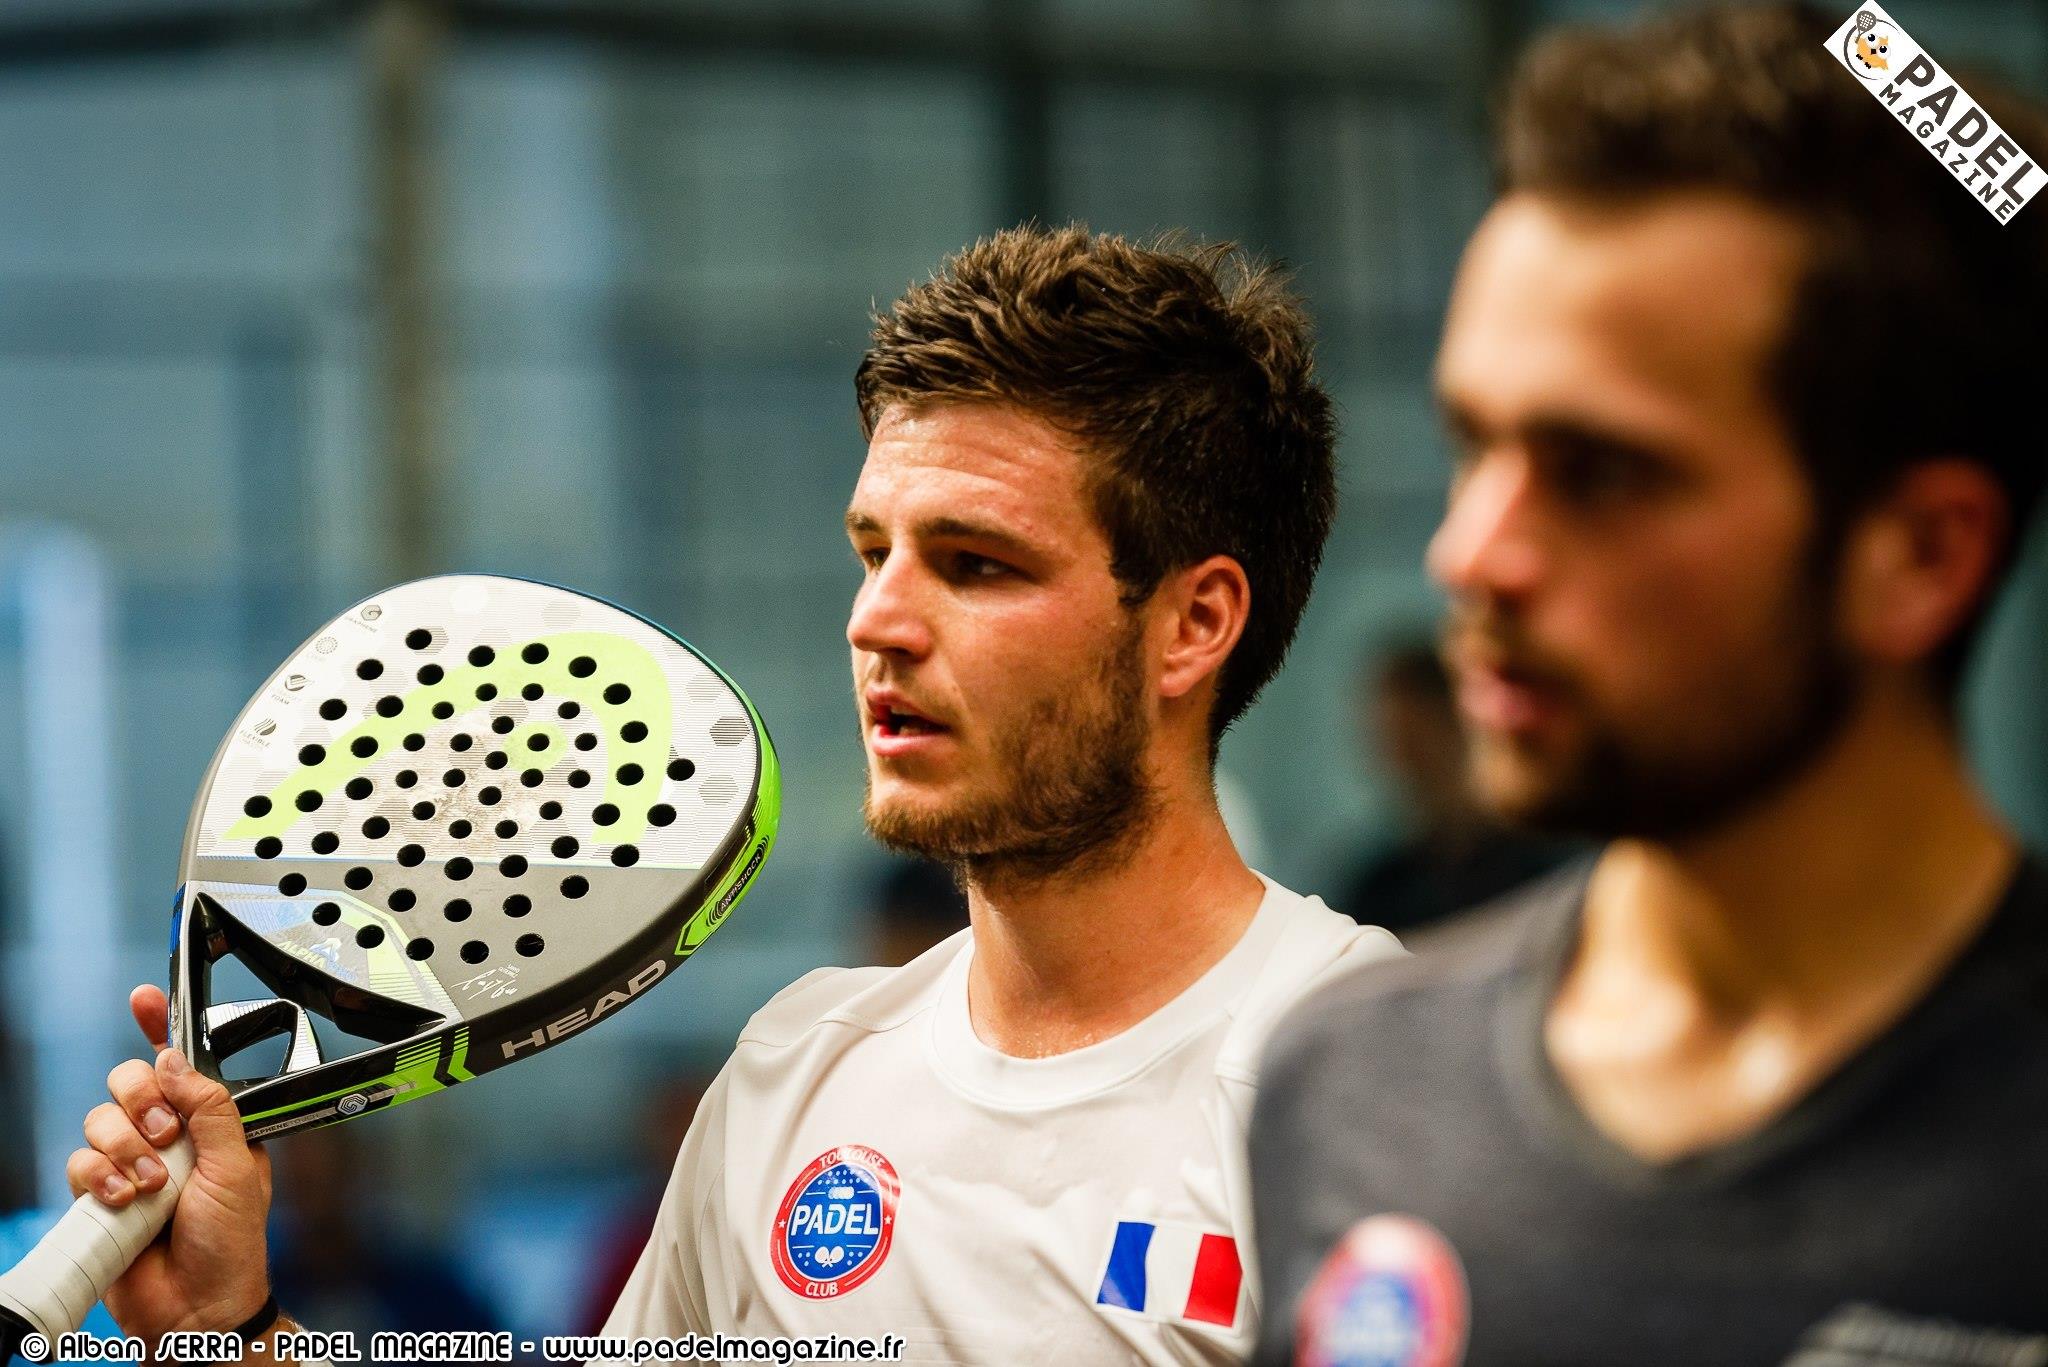 Point of padel incredible from Johan Bergeron